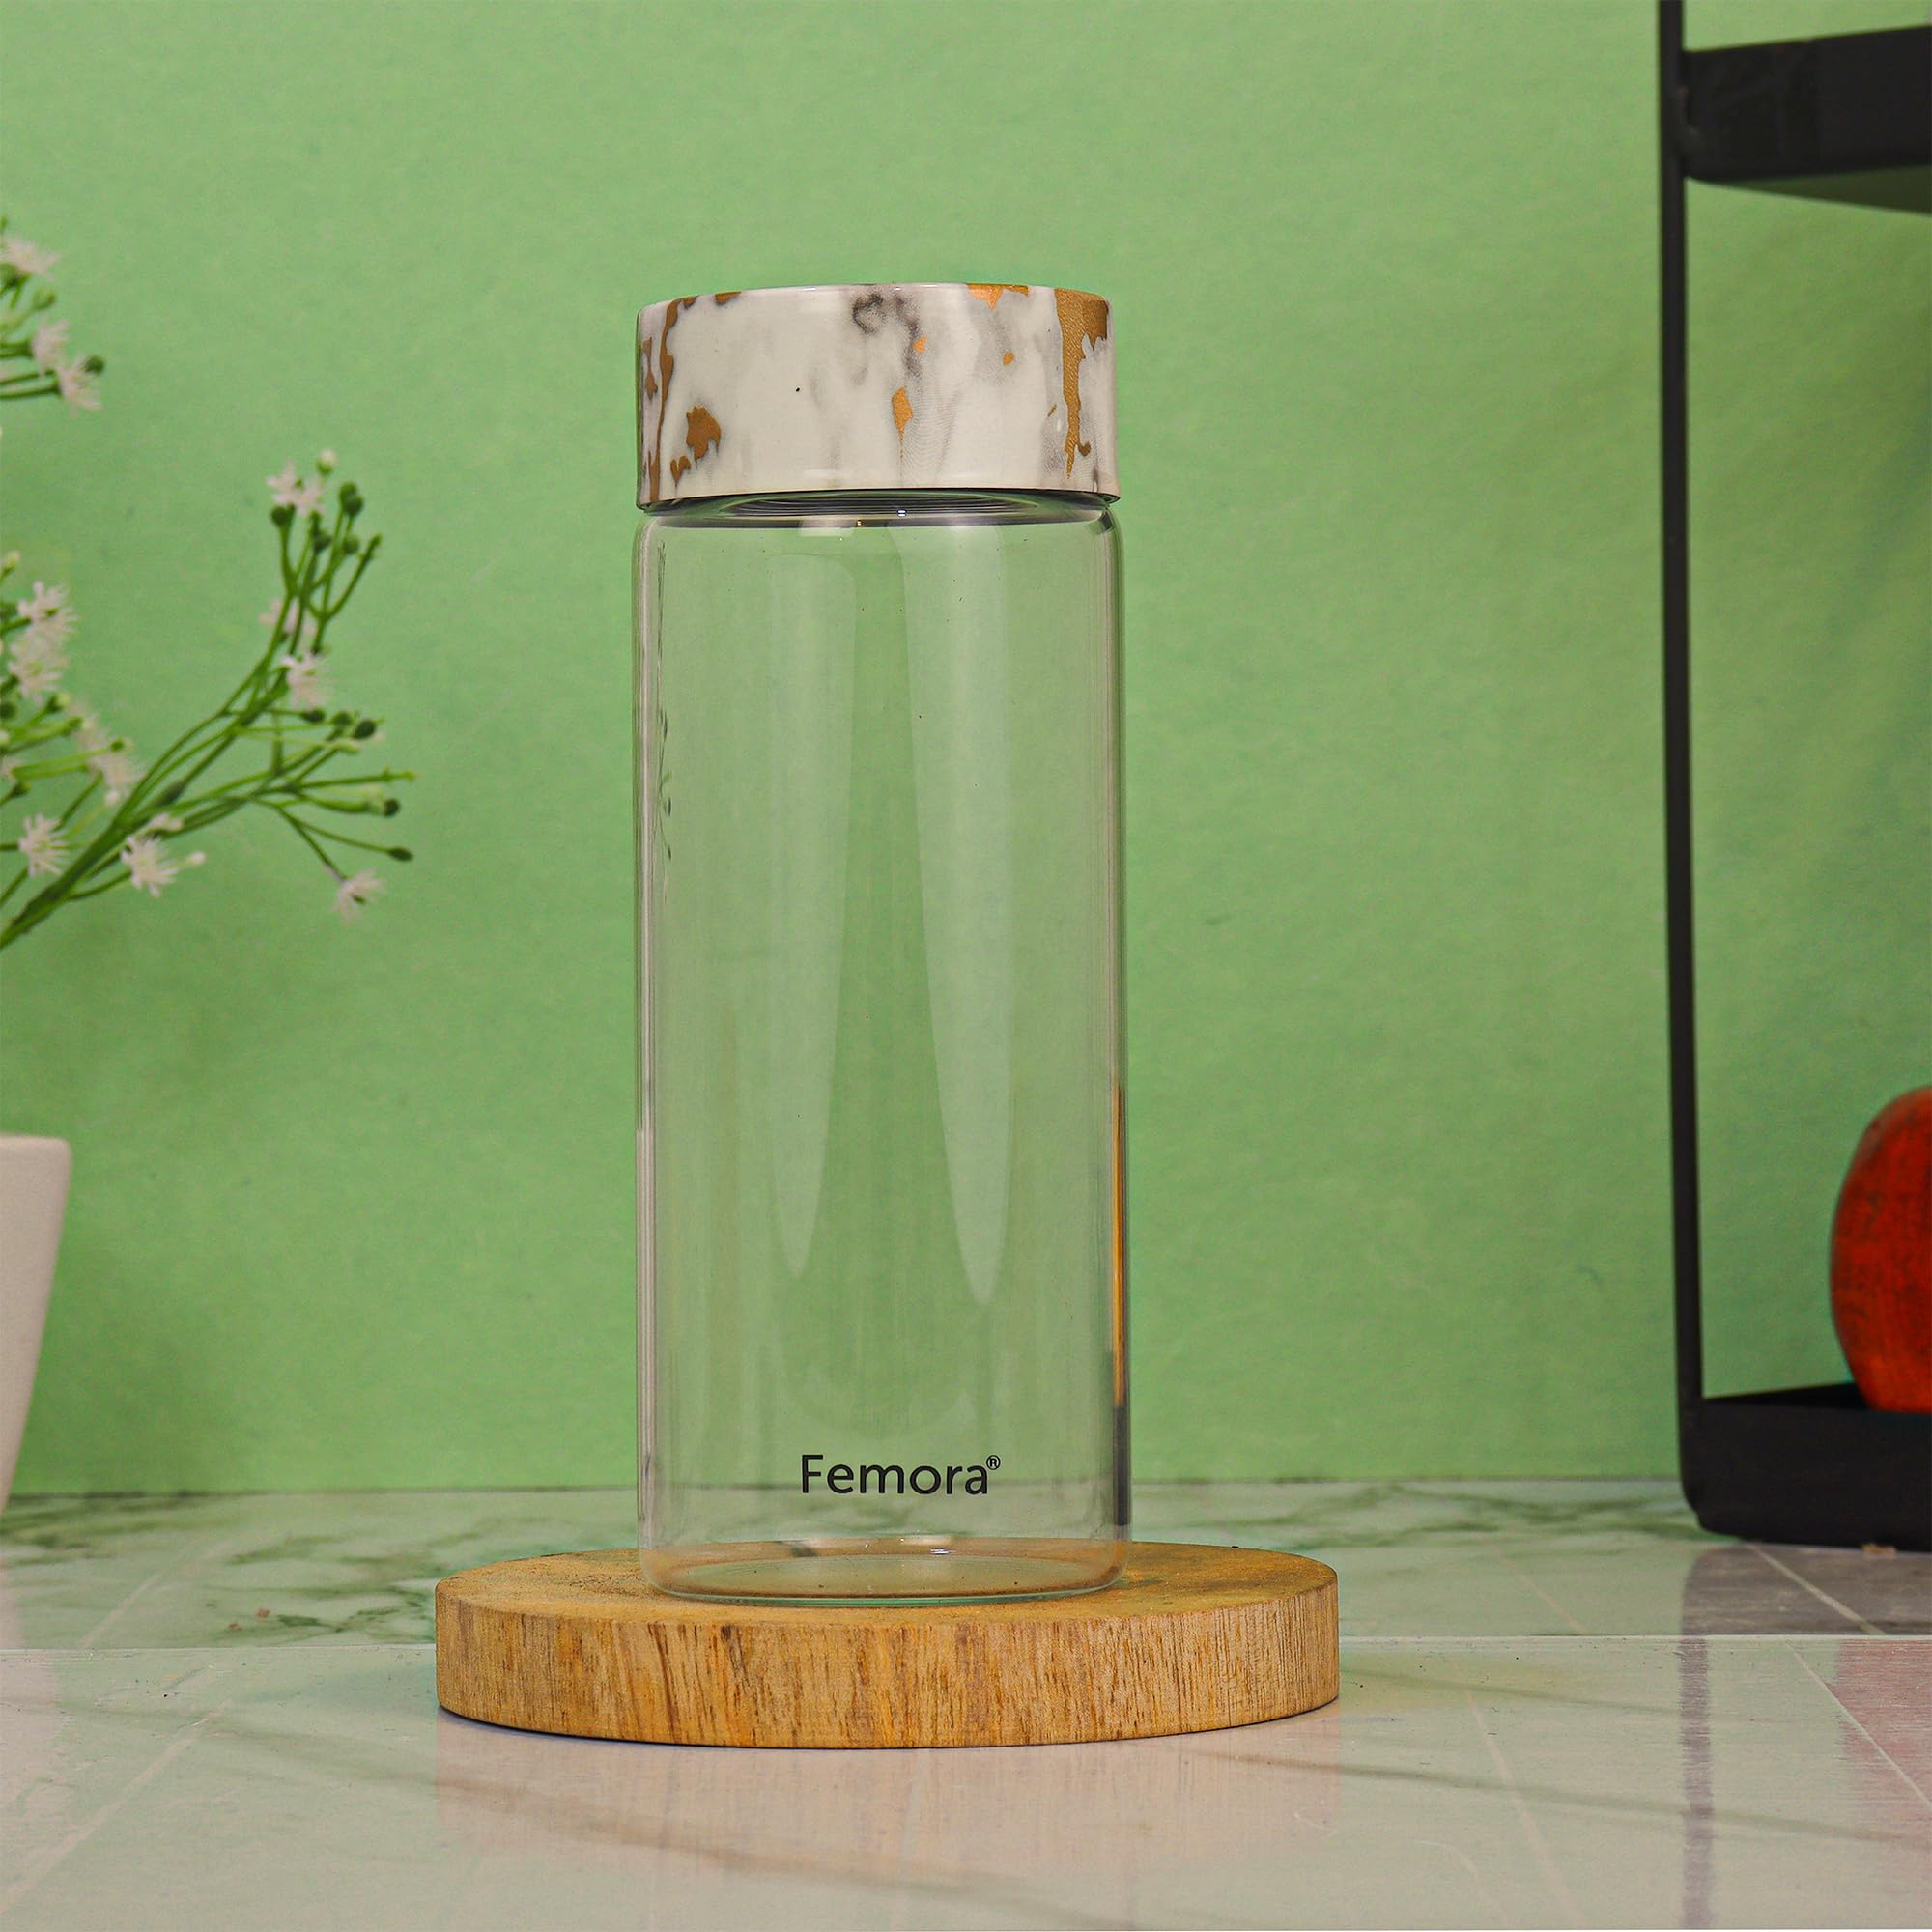 Femora Borosilicate Glass Water Bottle Durability and Elegance Combined, 500ML(2 Pc Set) (Marble Lid)